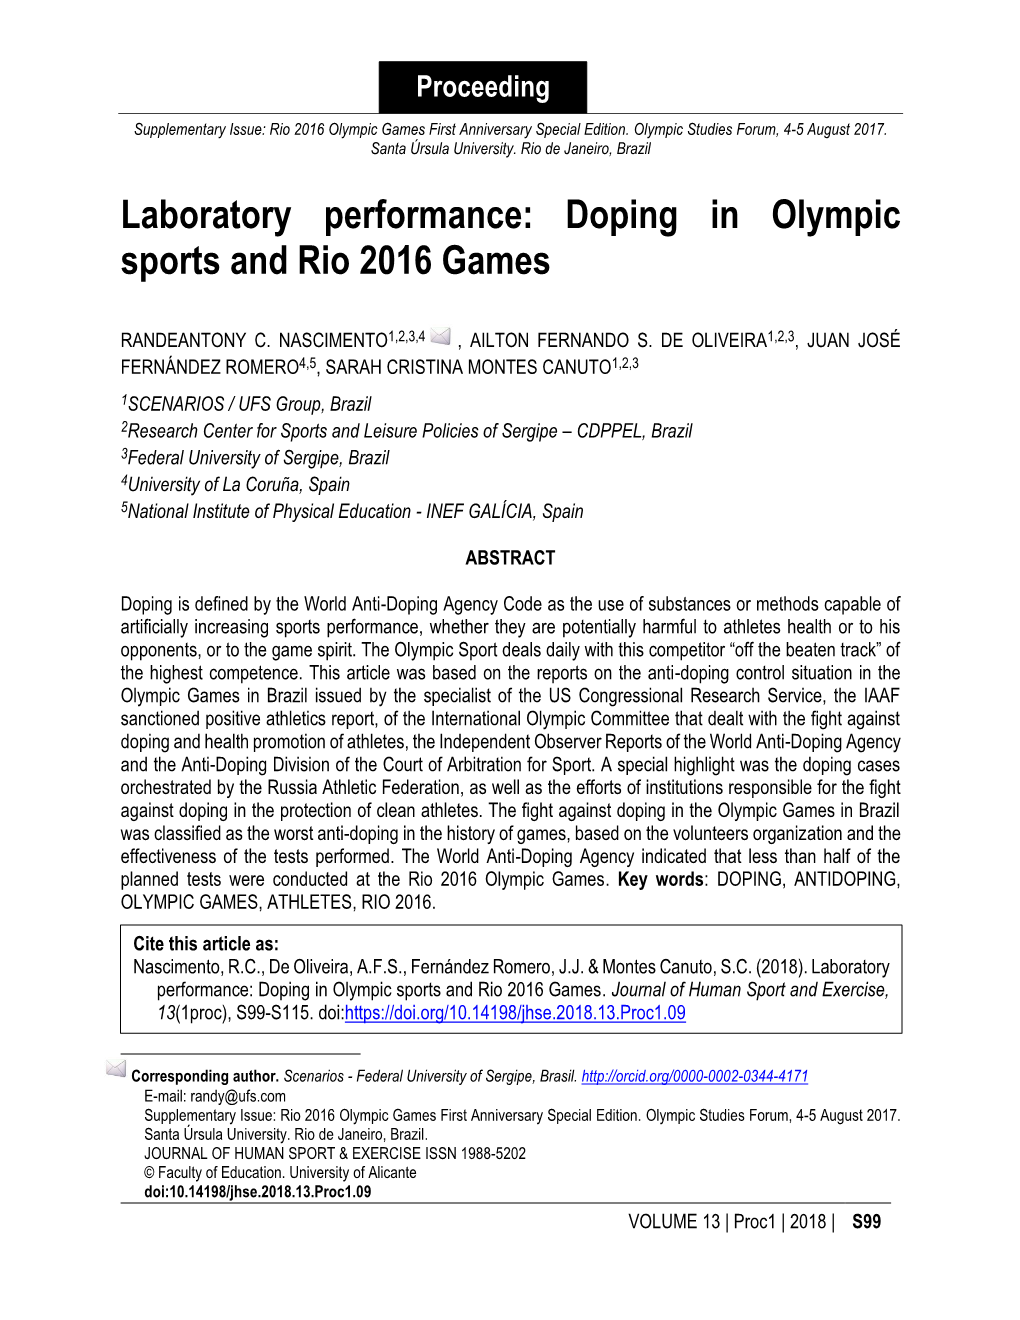 Doping in Olympic Sports and Rio 2016 Games